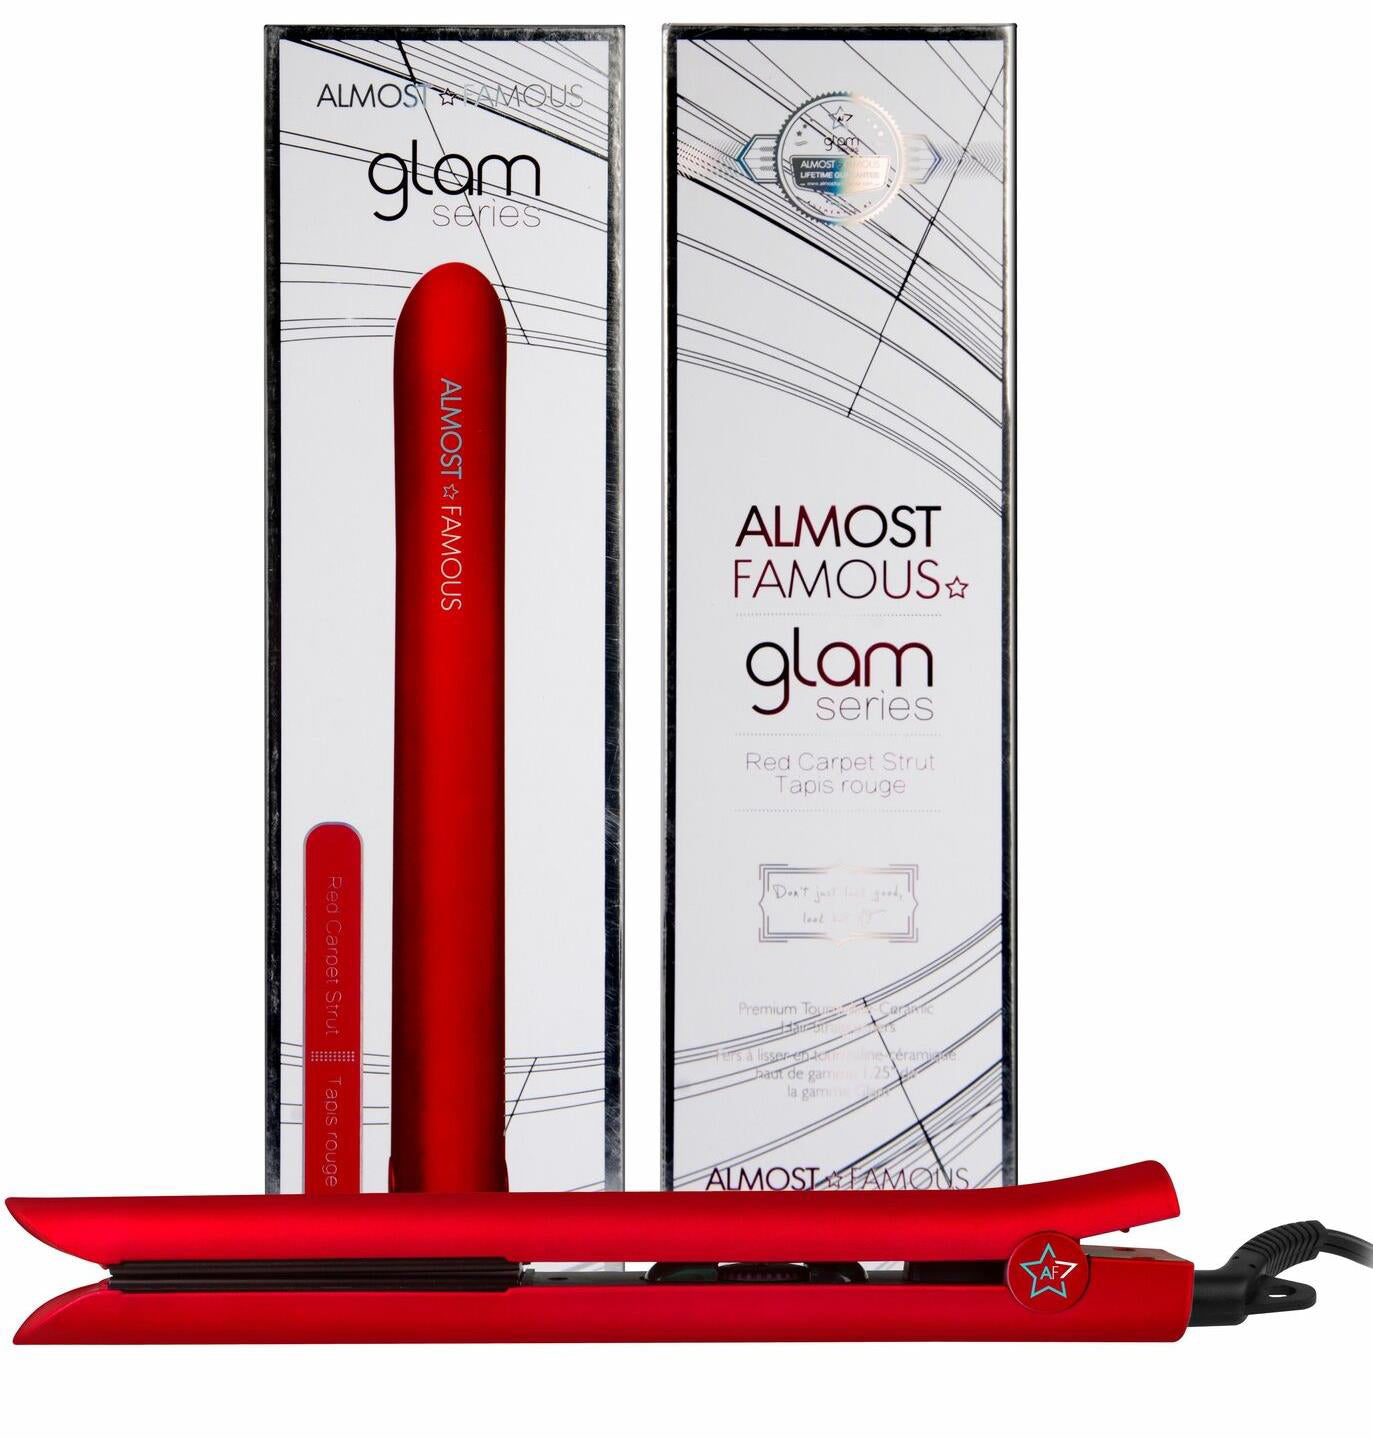 ALMOST FAMOUS GLAM SERIES FLAT IRON RED CARPET STRUT